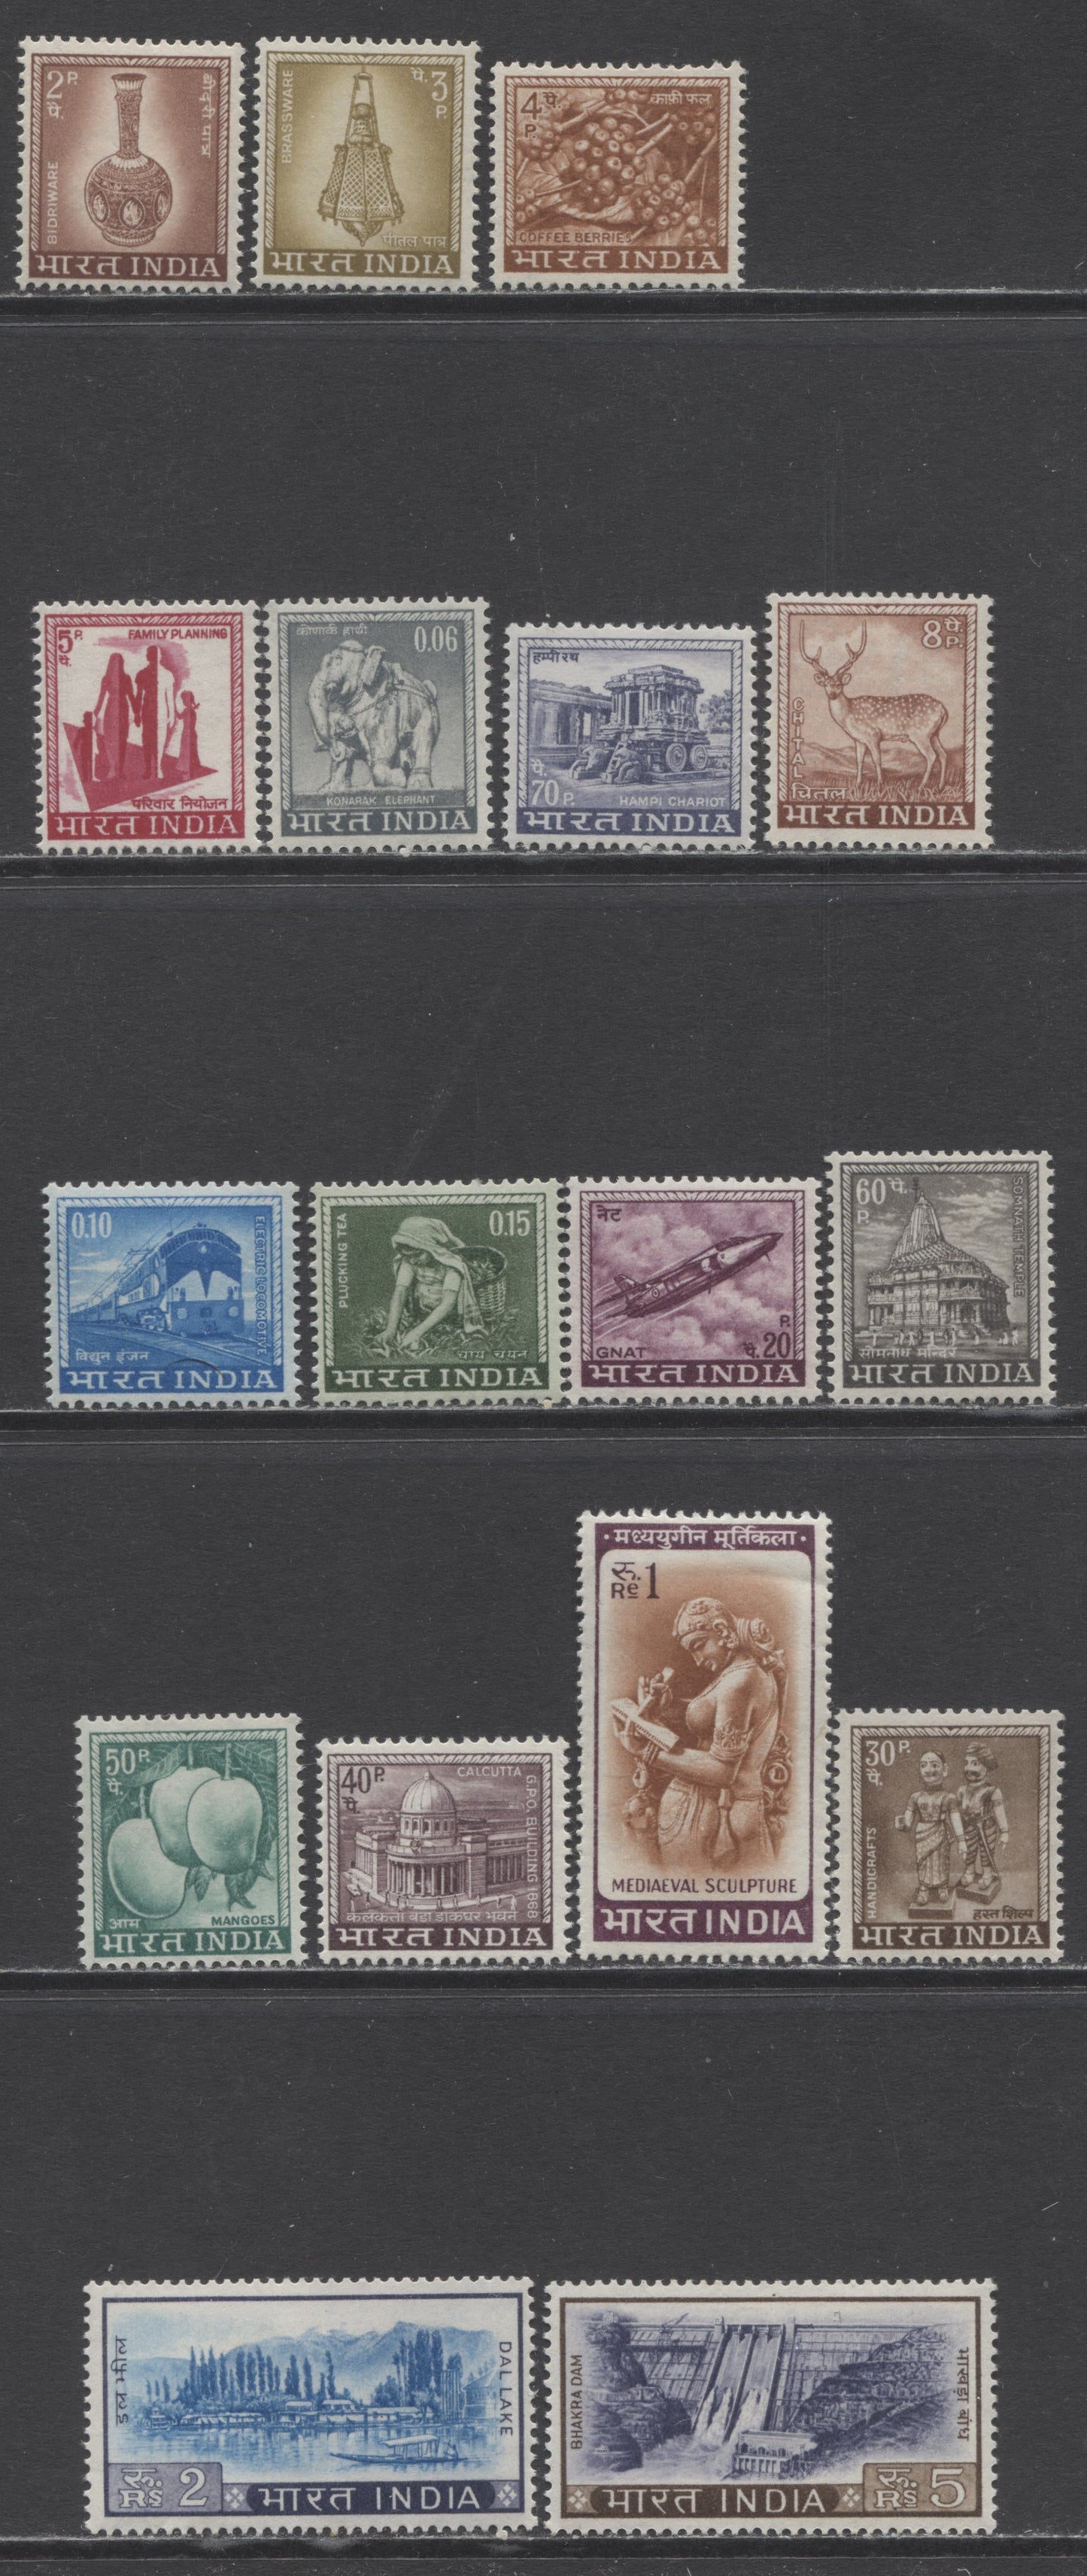 Lot 50 India SC#405-421 1965-1968 Definitive Issue, A VFNH/OG Range Of Singles, 2017 Scott Cat. $23.85 USD, Click on Listing to See ALL Pictures